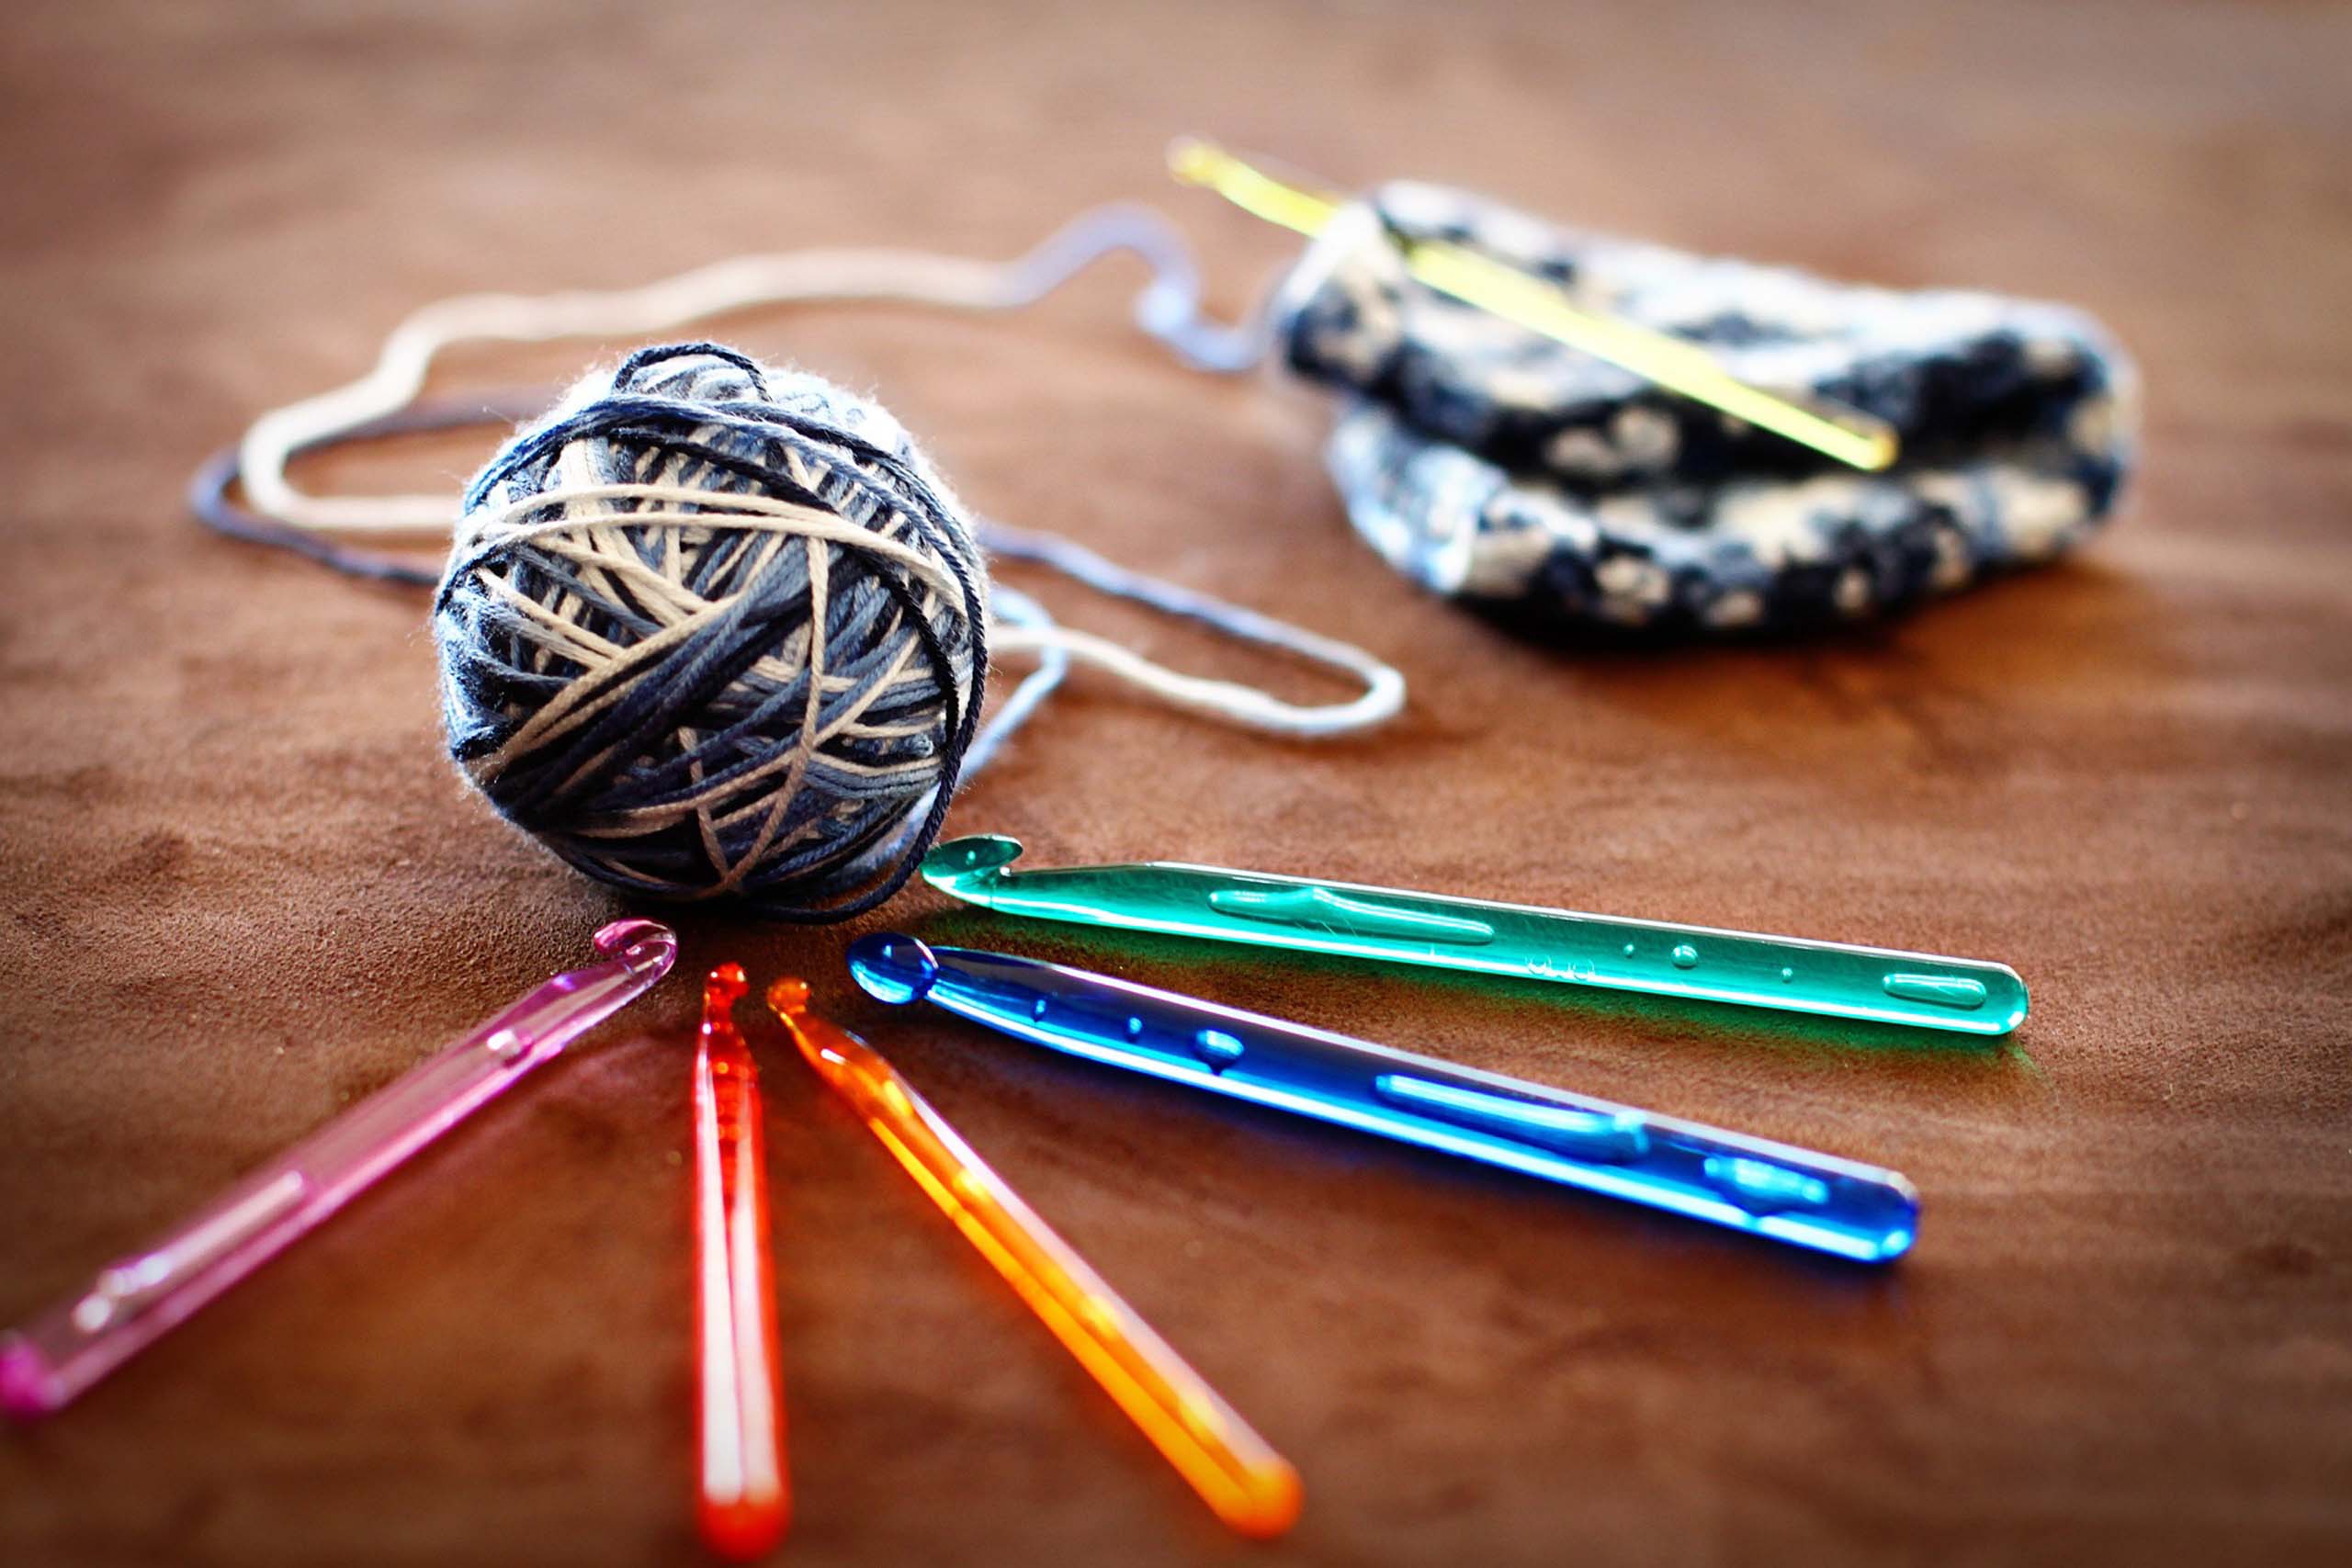 Knitters, would-be knitters and crocheters of all ages and abilities are welcome to meet at this fun, relaxed regular group at Cronulla Library every Wednesday at 1pm.